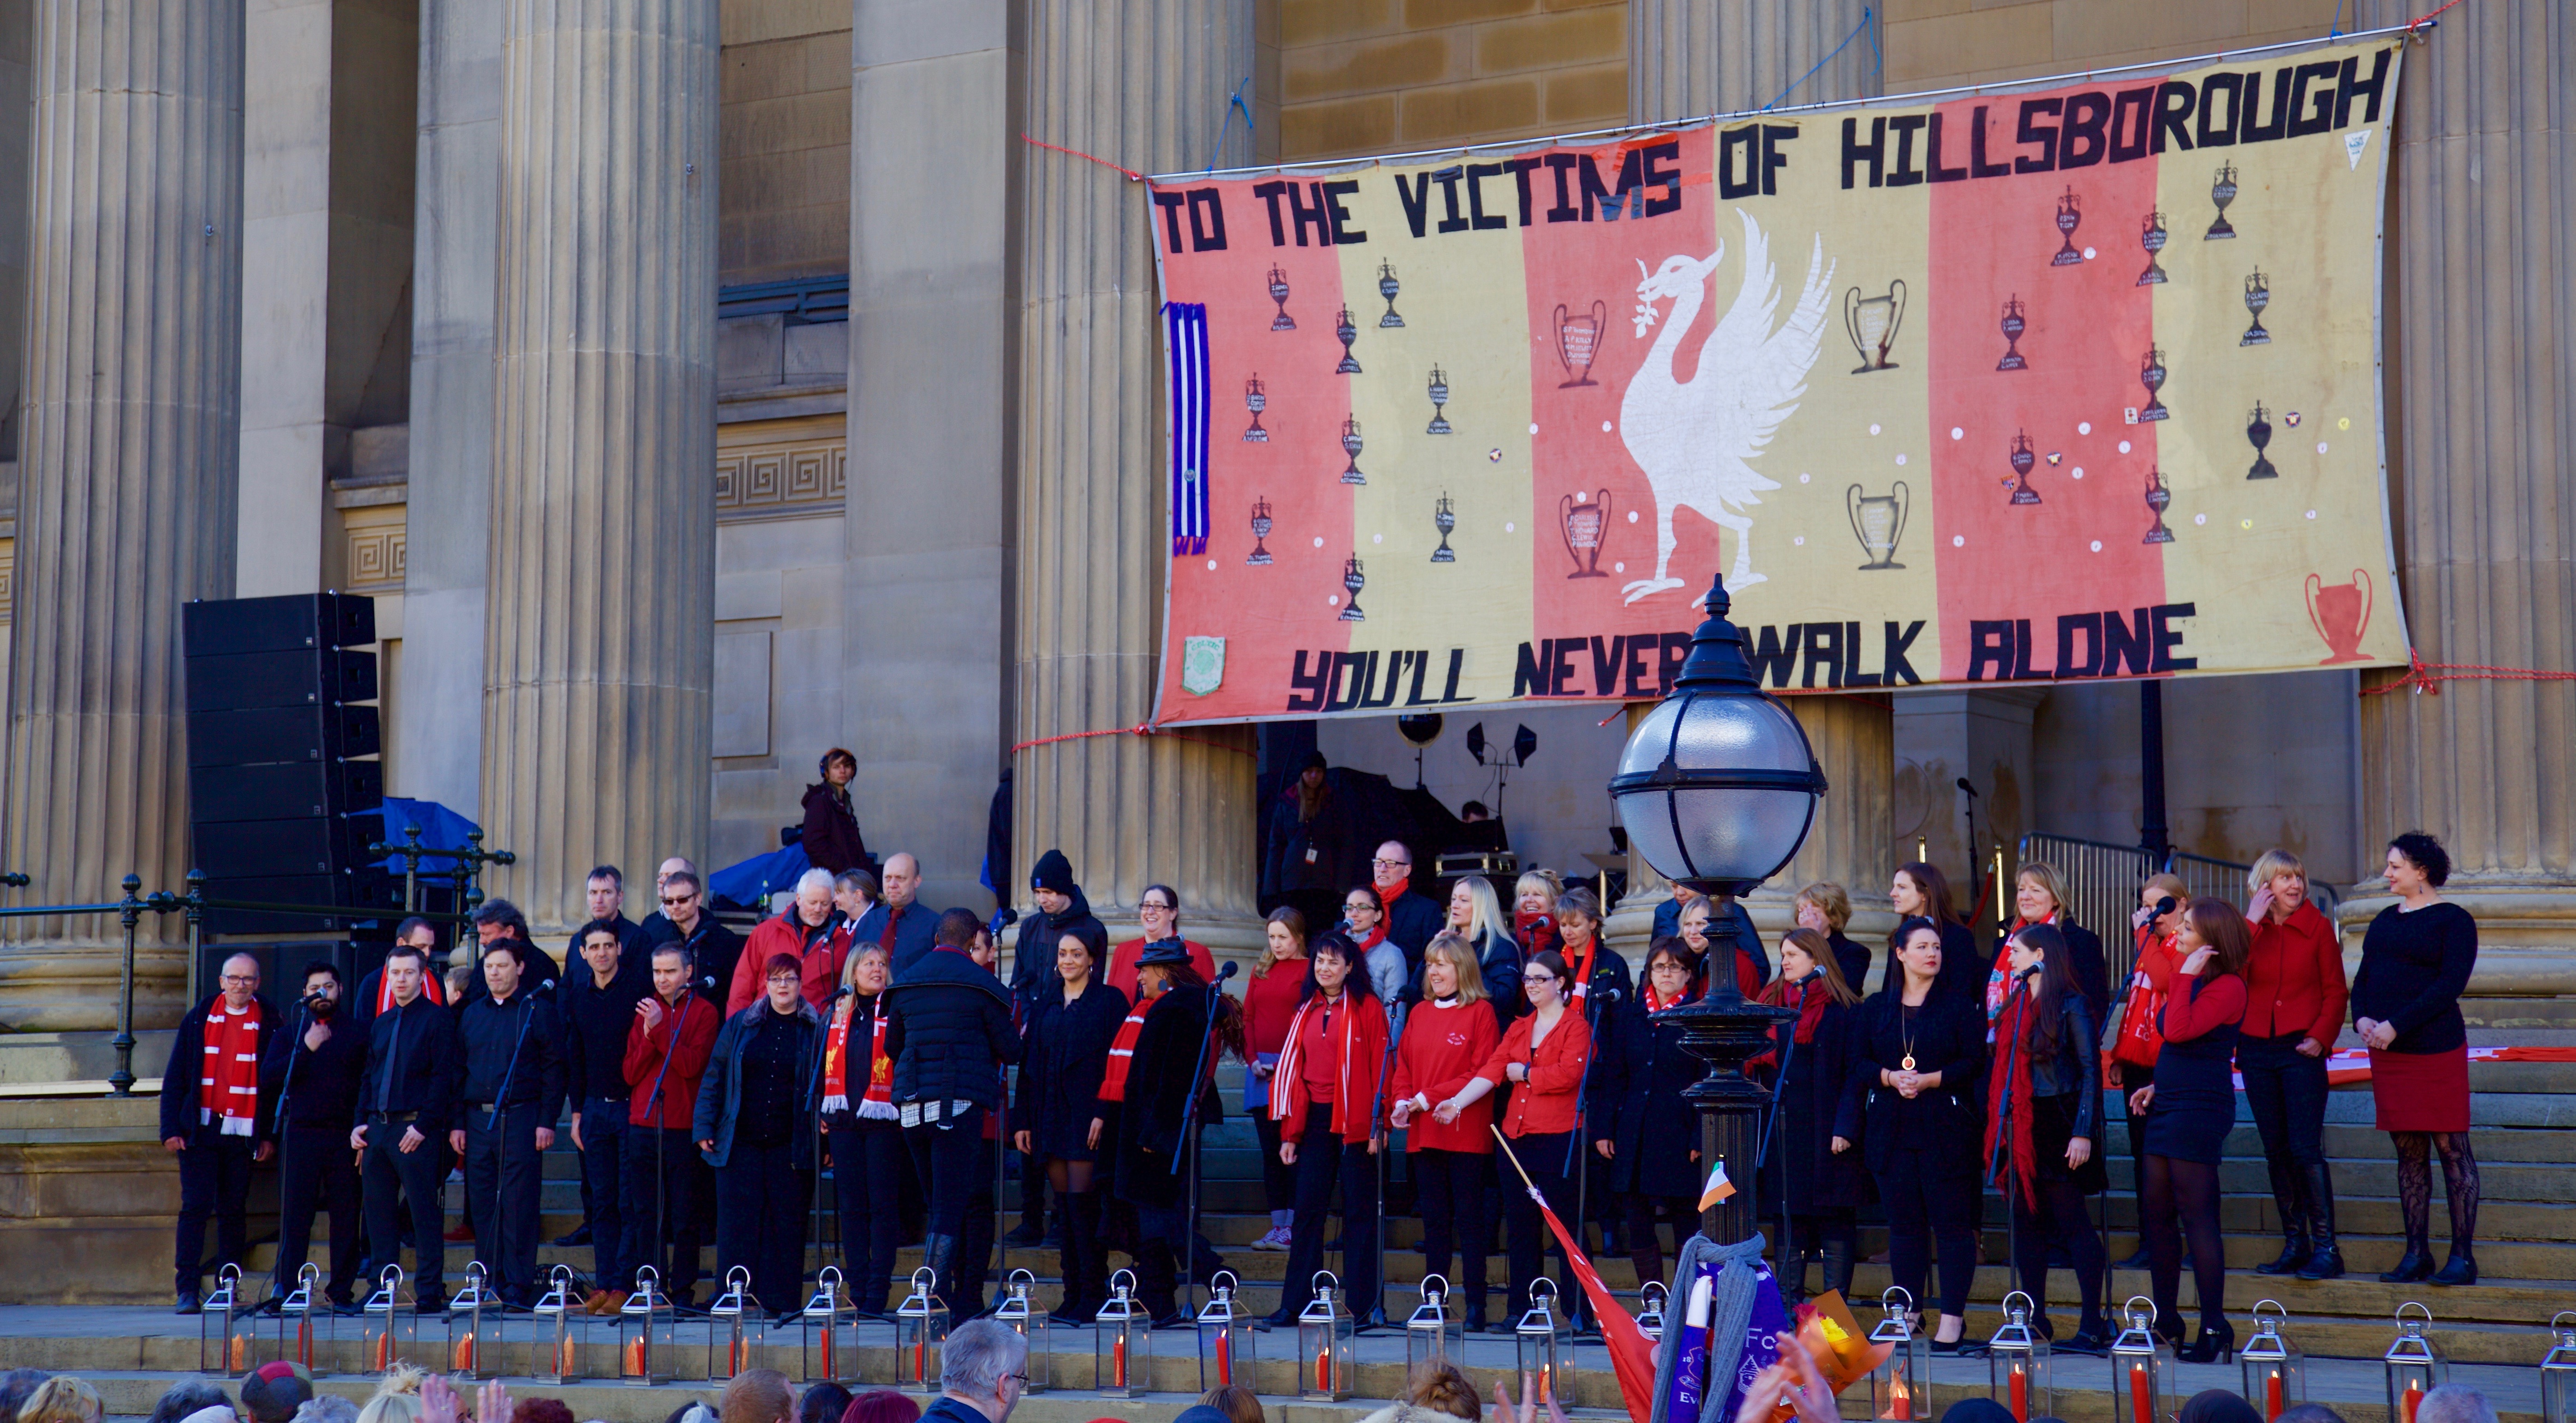 Hillsborough Commemorative Event, St George's Hall 27th April 2016 - The Guide Liverpool. Pictures Mark Kaye